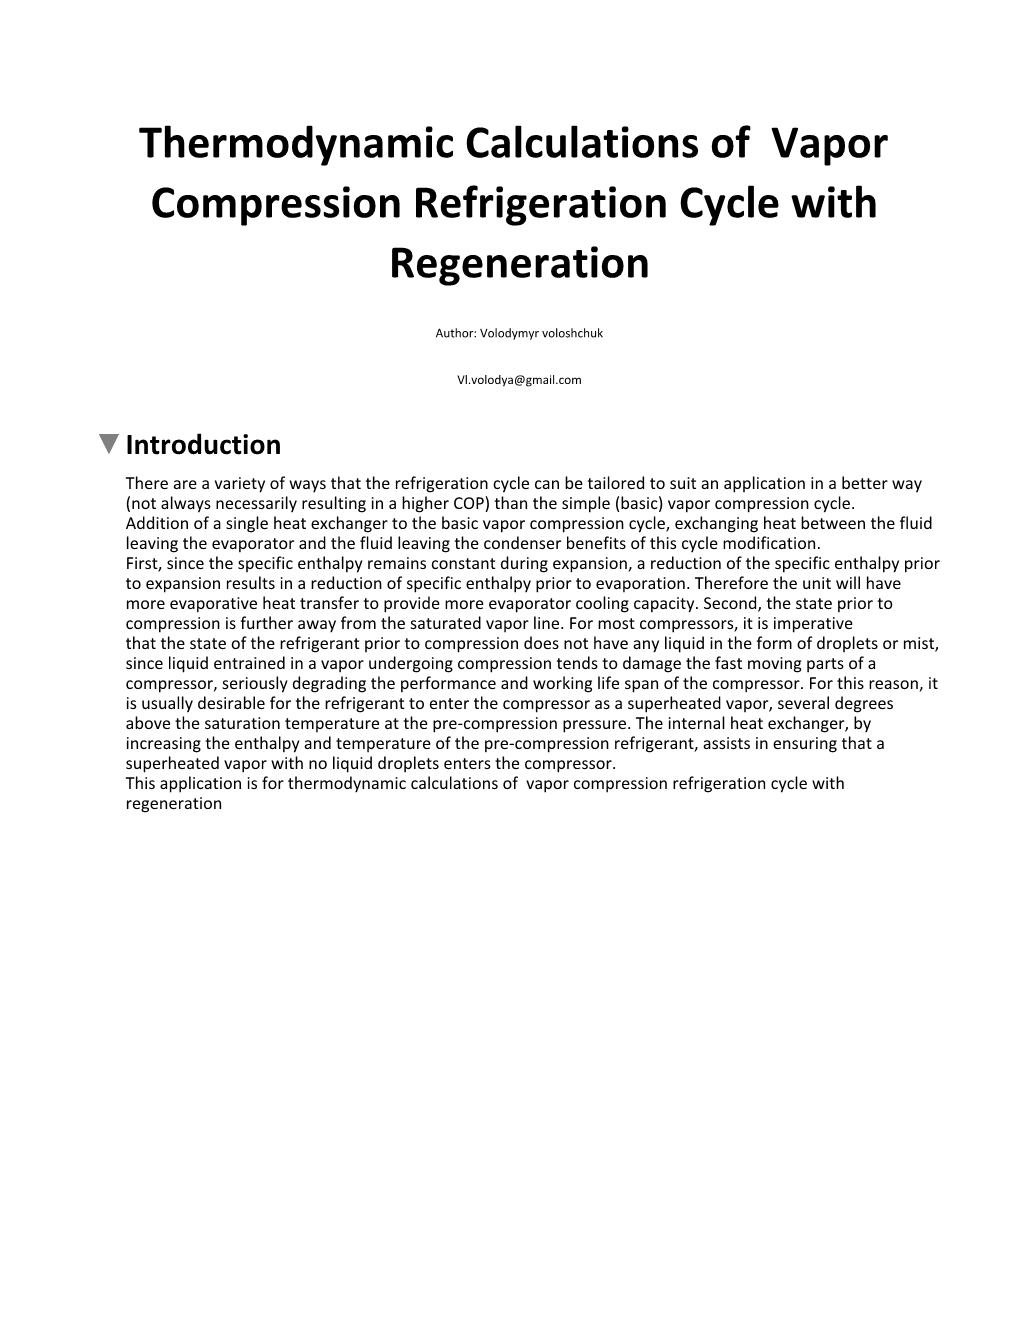 Thermodynamic Calculations of Vapor Compression Refrigeration Cycle with Regeneration